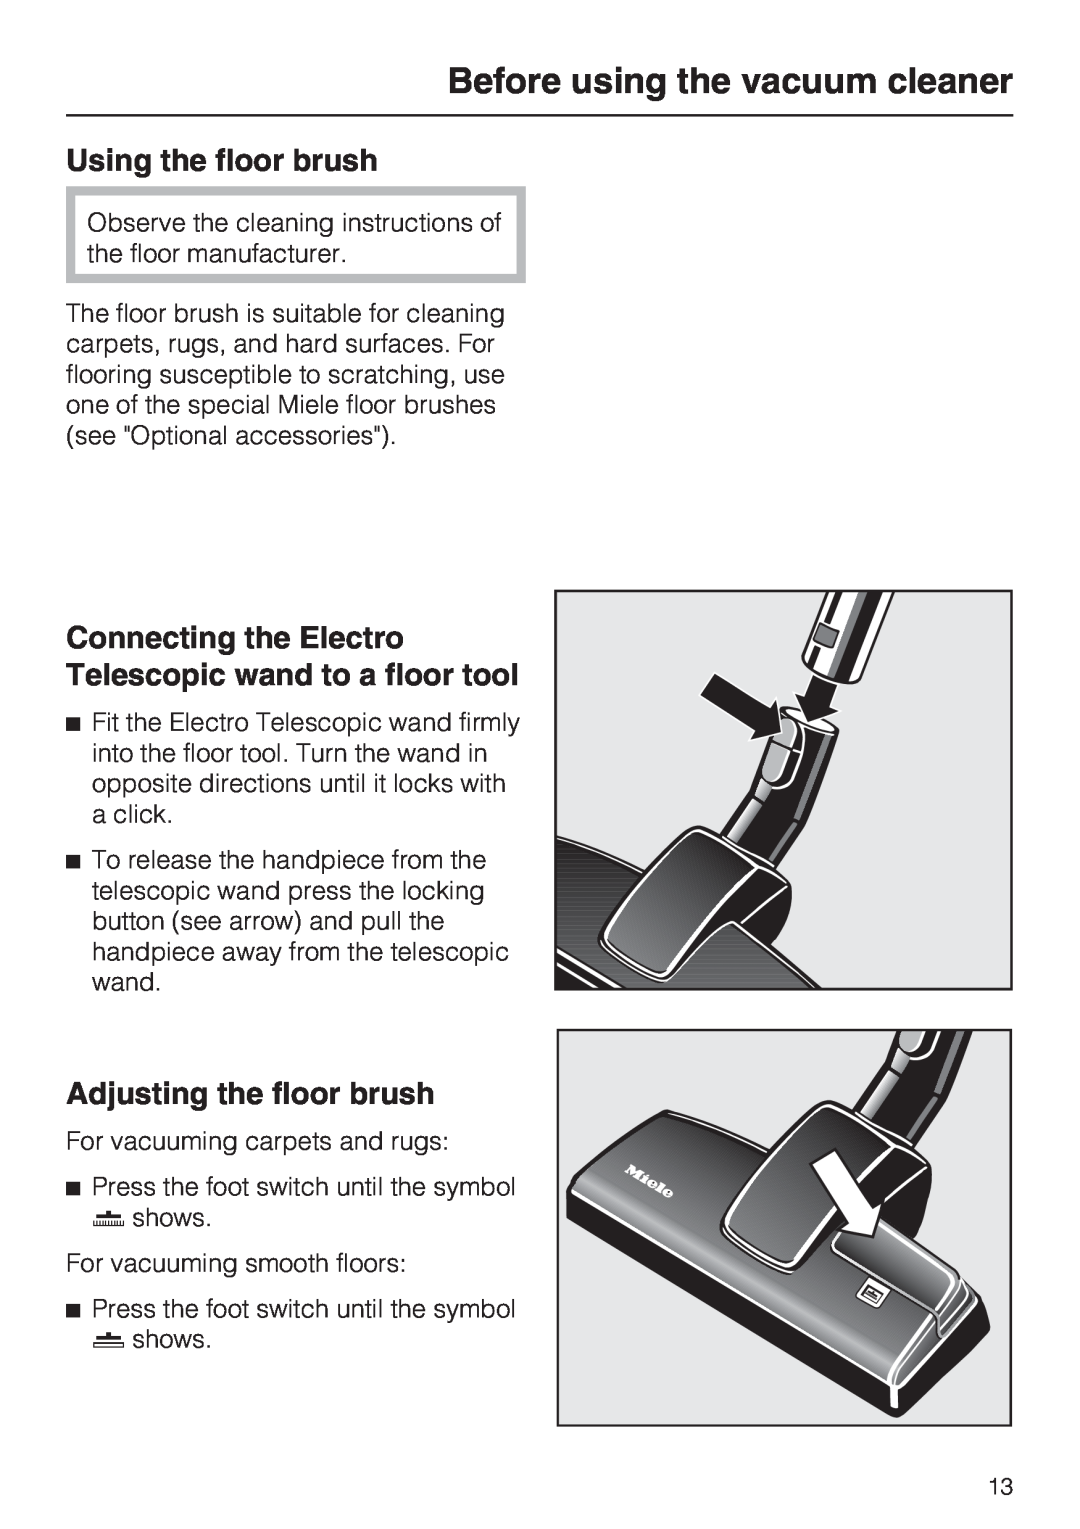 Miele S 5980 operating instructions Using the floor brush, Adjusting the floor brush, Before using the vacuum cleaner 